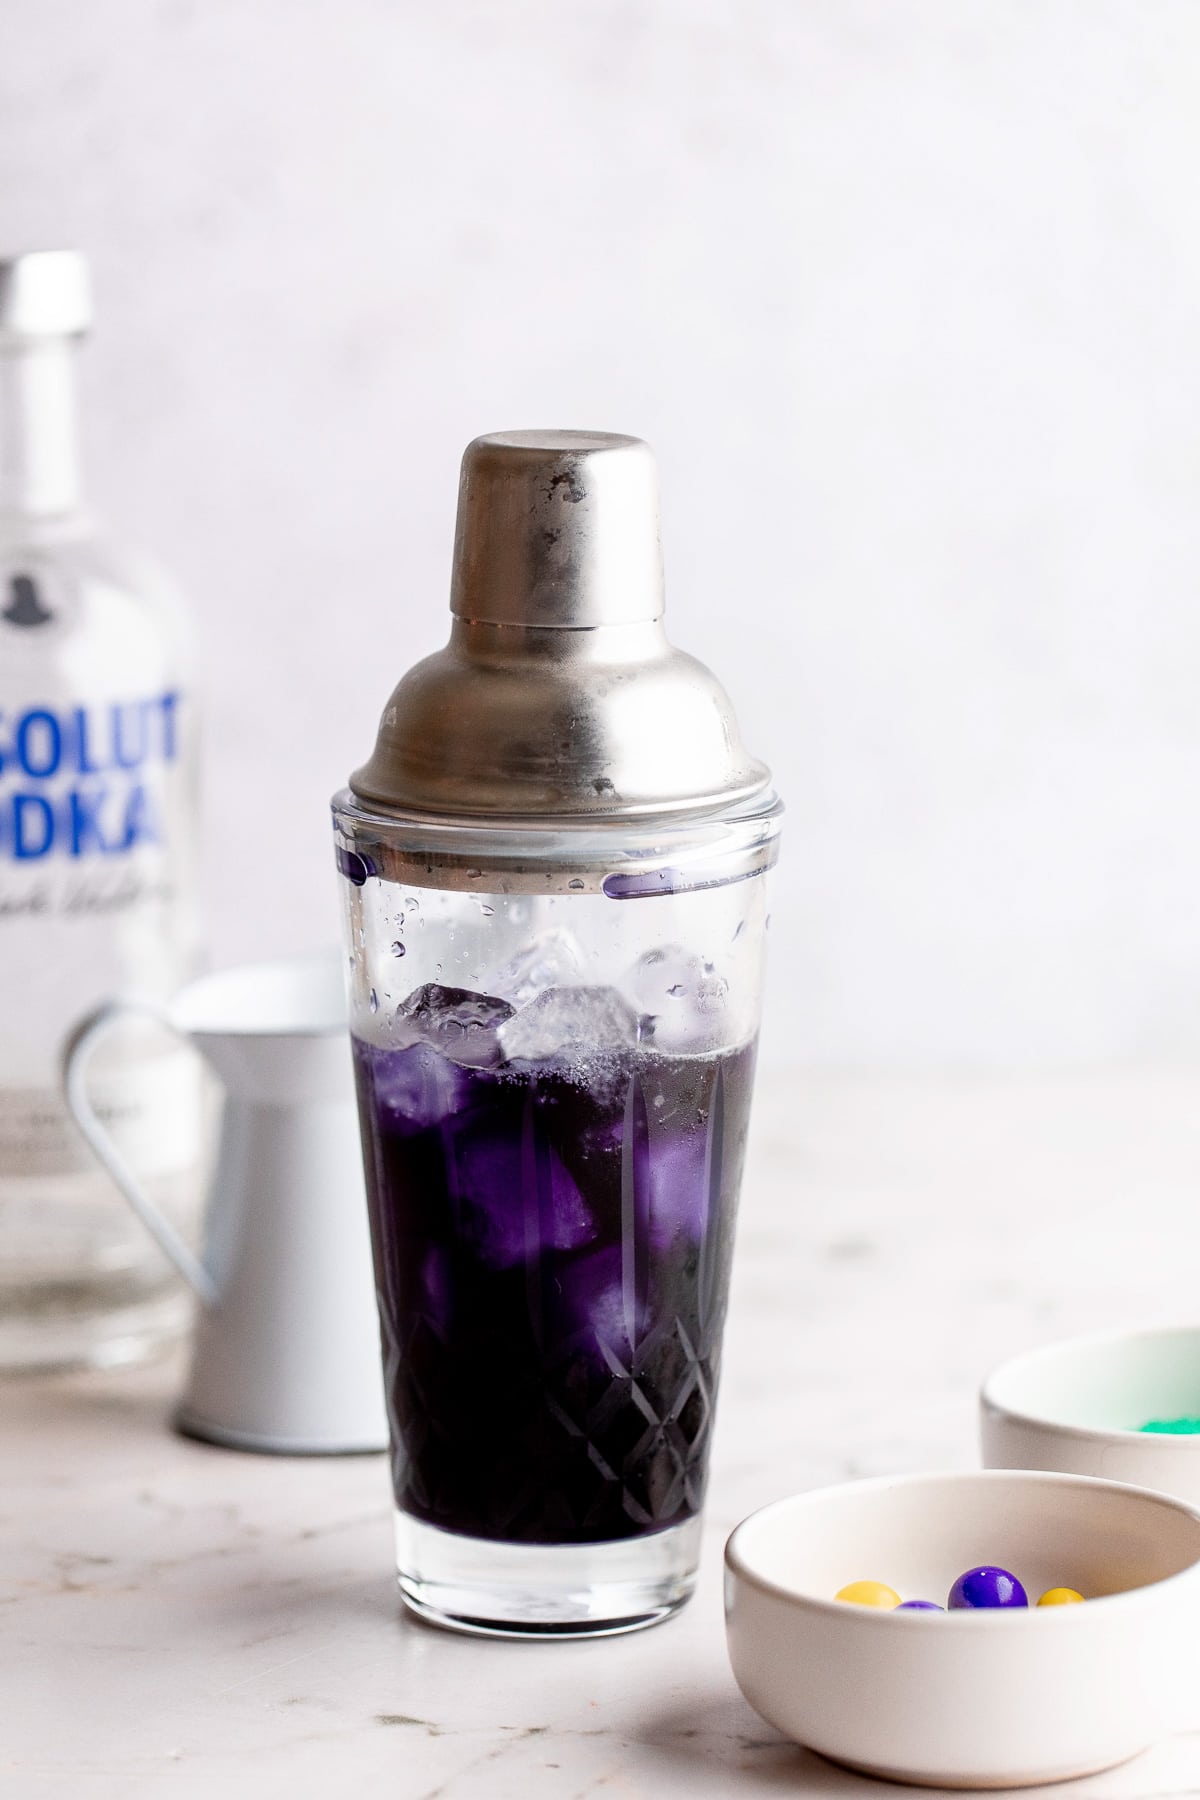 A cocktail shaker with purple liquid inside.